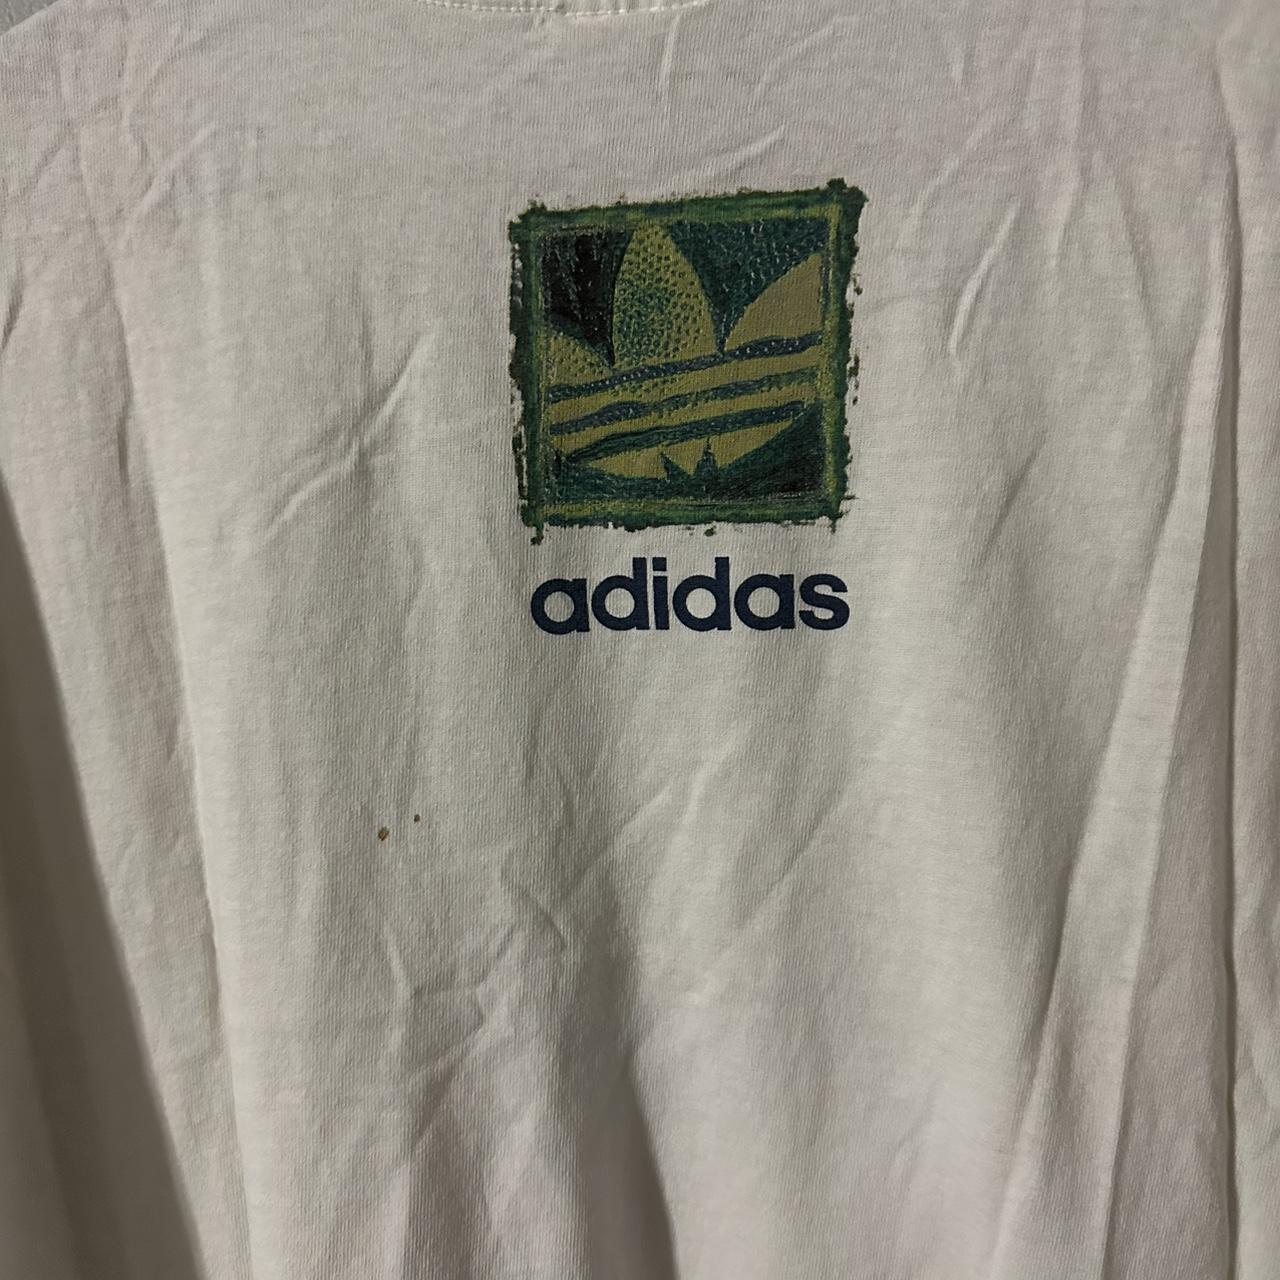 Adidas Men's White and Green T-shirt (4)